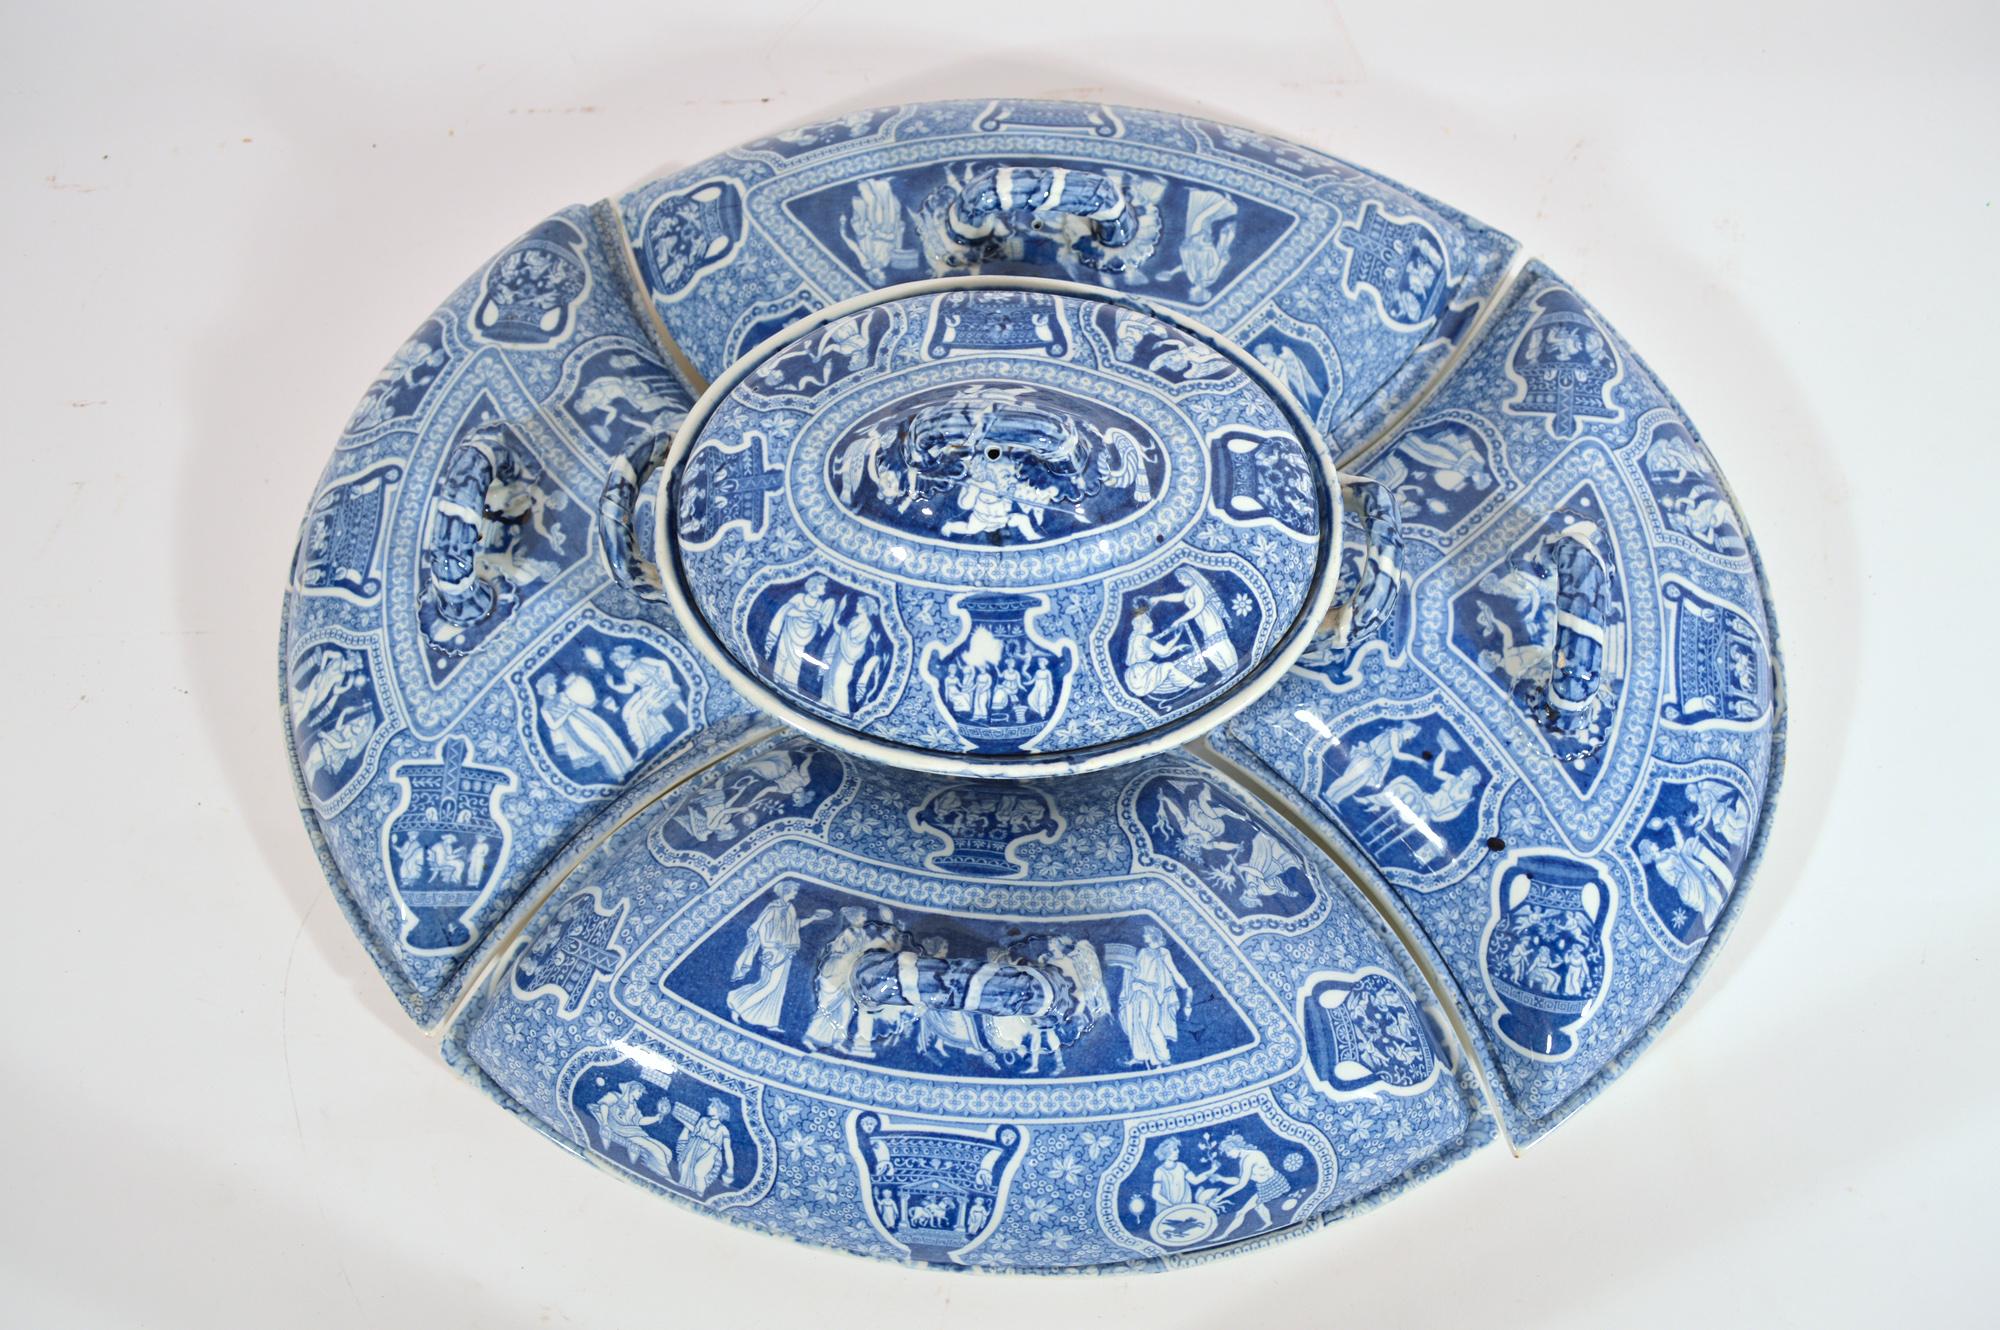 Spode pottery neoclassical Greek pattern blue printed supper set 
Early-19th century 

From a large collection of Greek pattern pieces in various colors and forms

The rare Spode pottery underglaze blue Greek pattern supper set consists of a